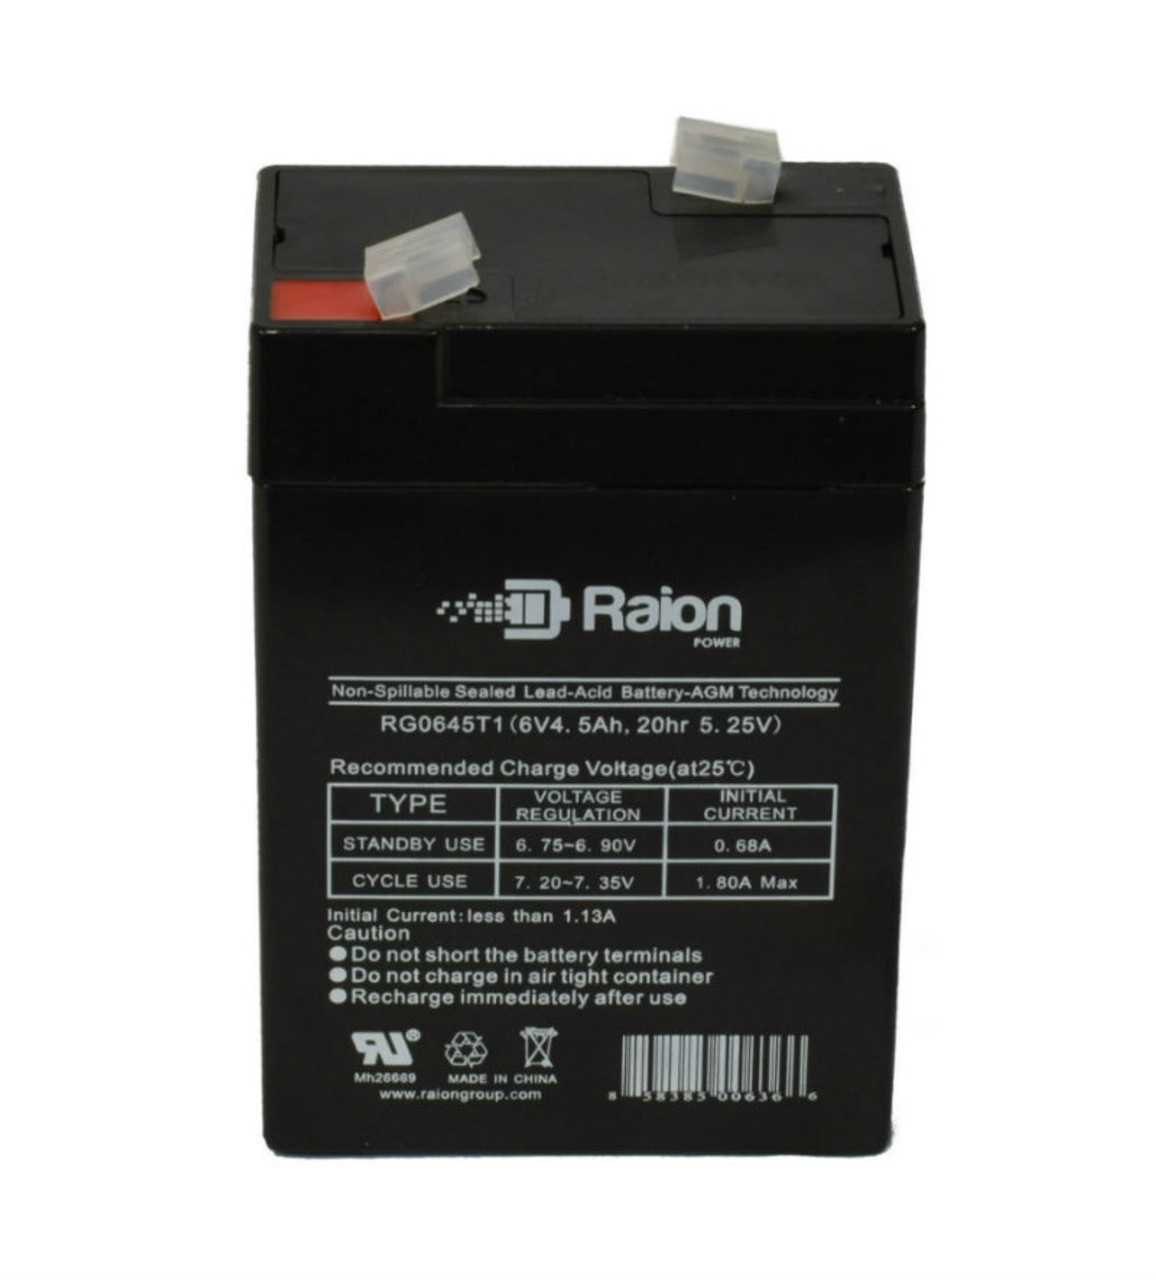 Raion Power RG0645T1 Replacement Battery Cartridge for Criticare Systems 506